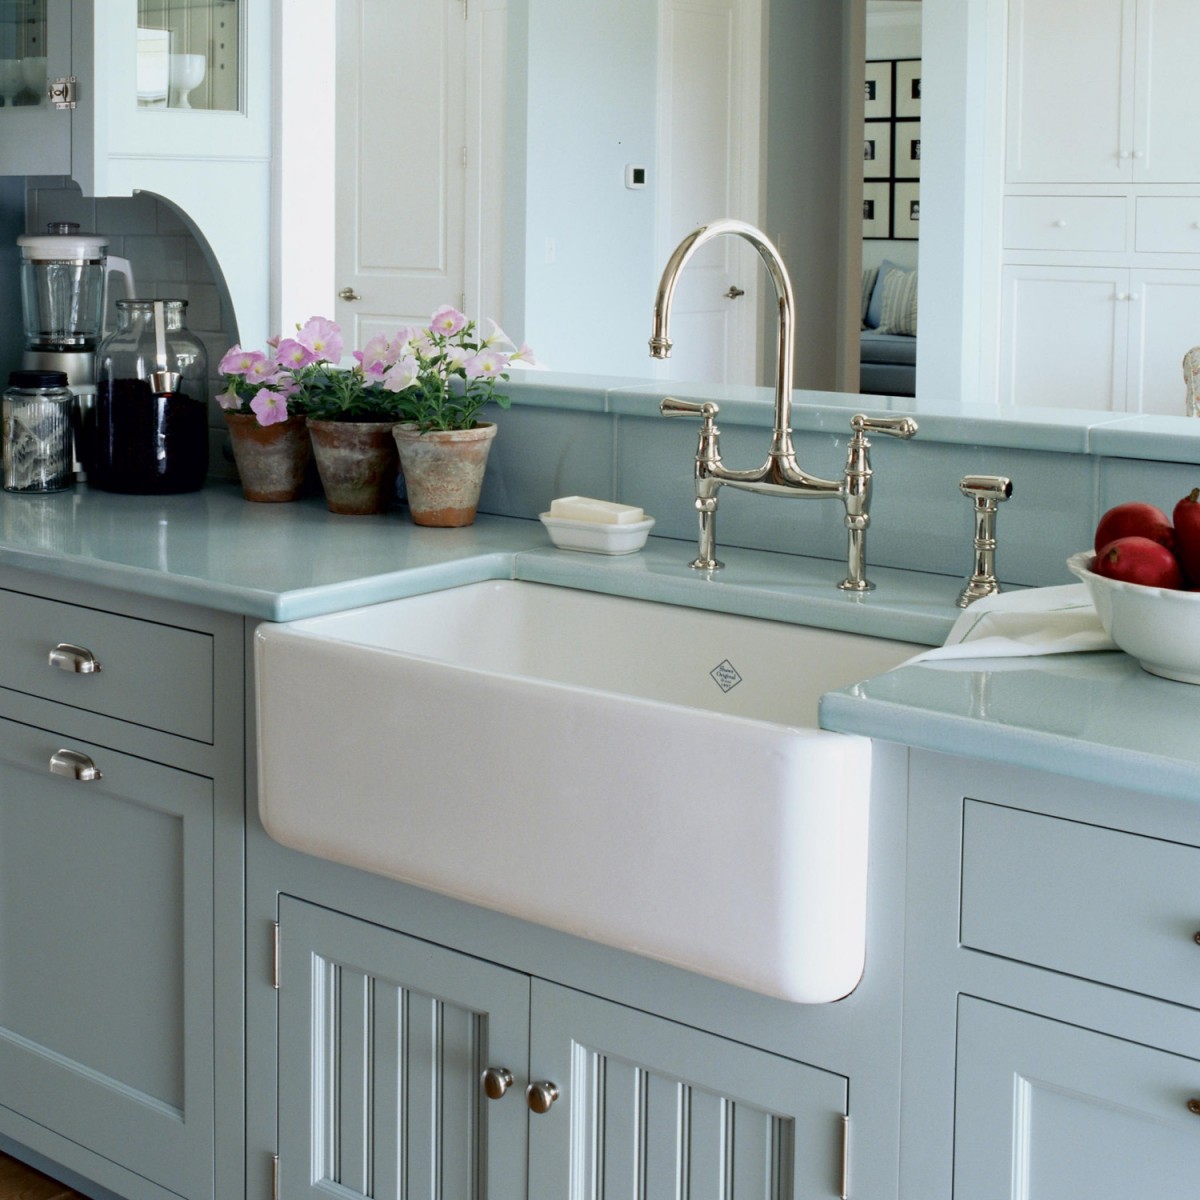 Shaws Butler 800 fireclay butler sink. Distributed in Australia by Luxe by Design, Brisbane.